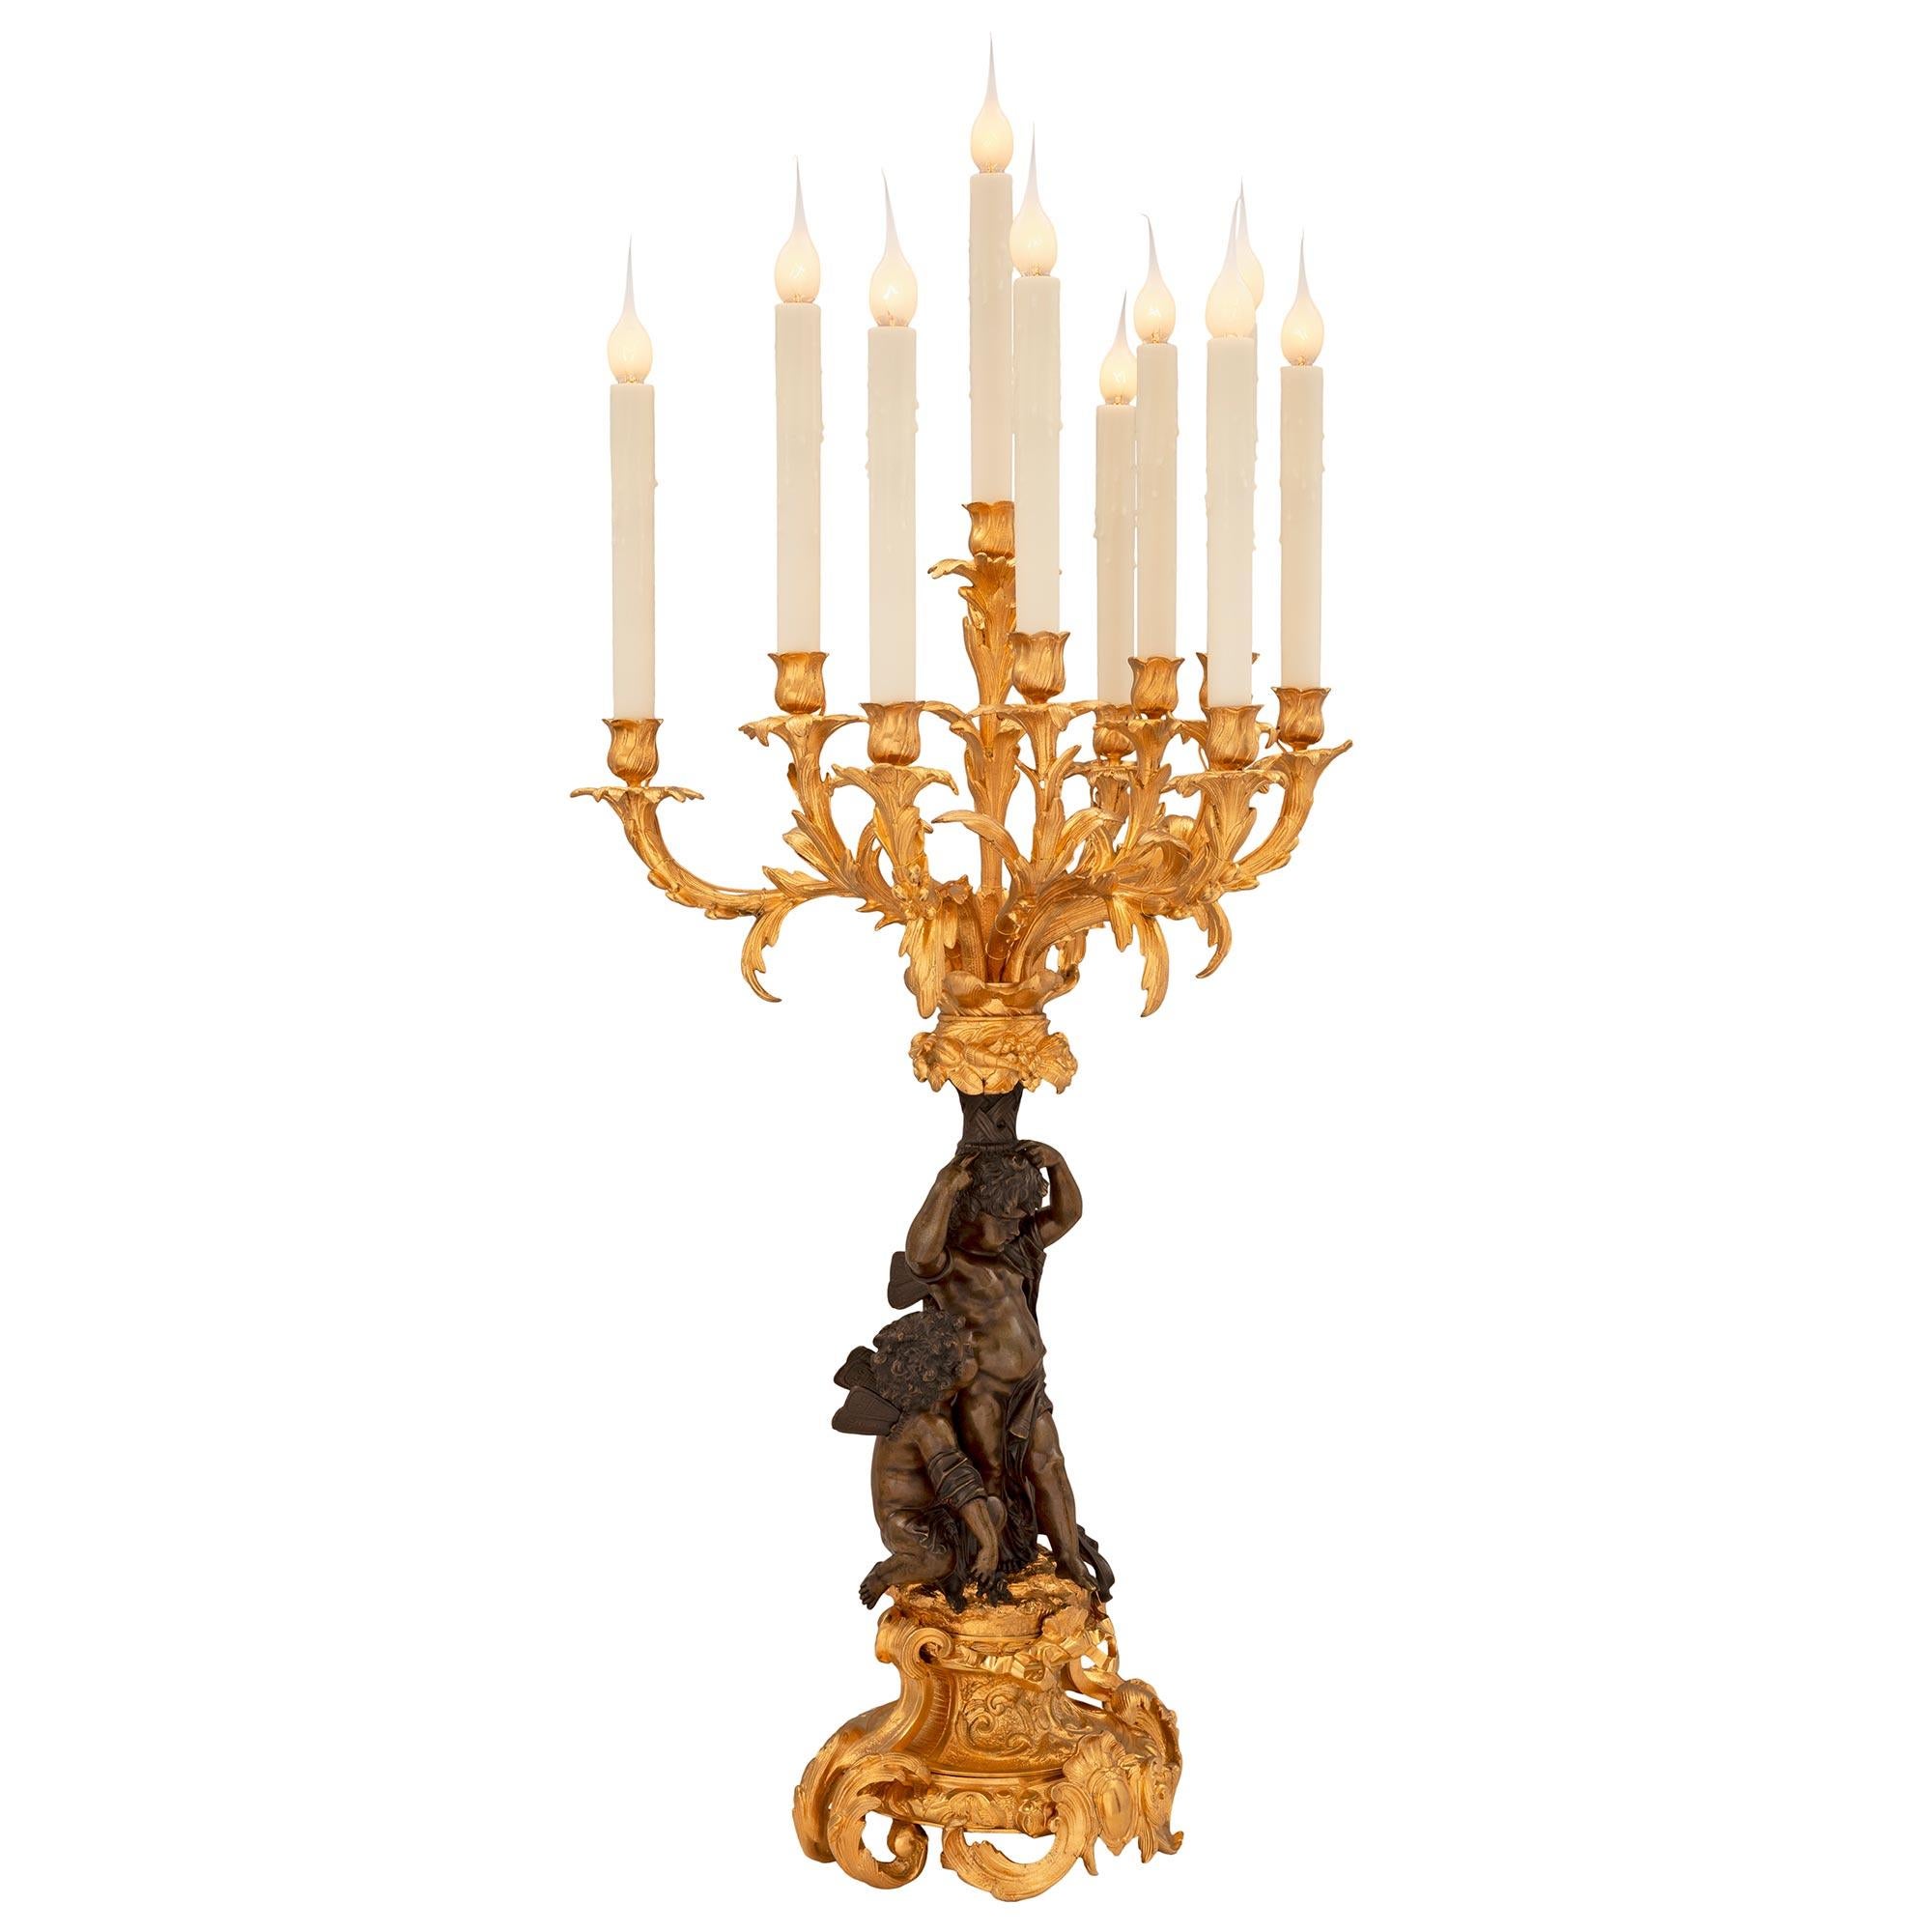 A stunning and most impressive true pair of French 19th century Louis XV st. patinated bronze and ormolu candelabra lamps. Each ten arm lamp is raised by an exceptionally well executed base with beautiful scrolled foliate designs and large acanthus